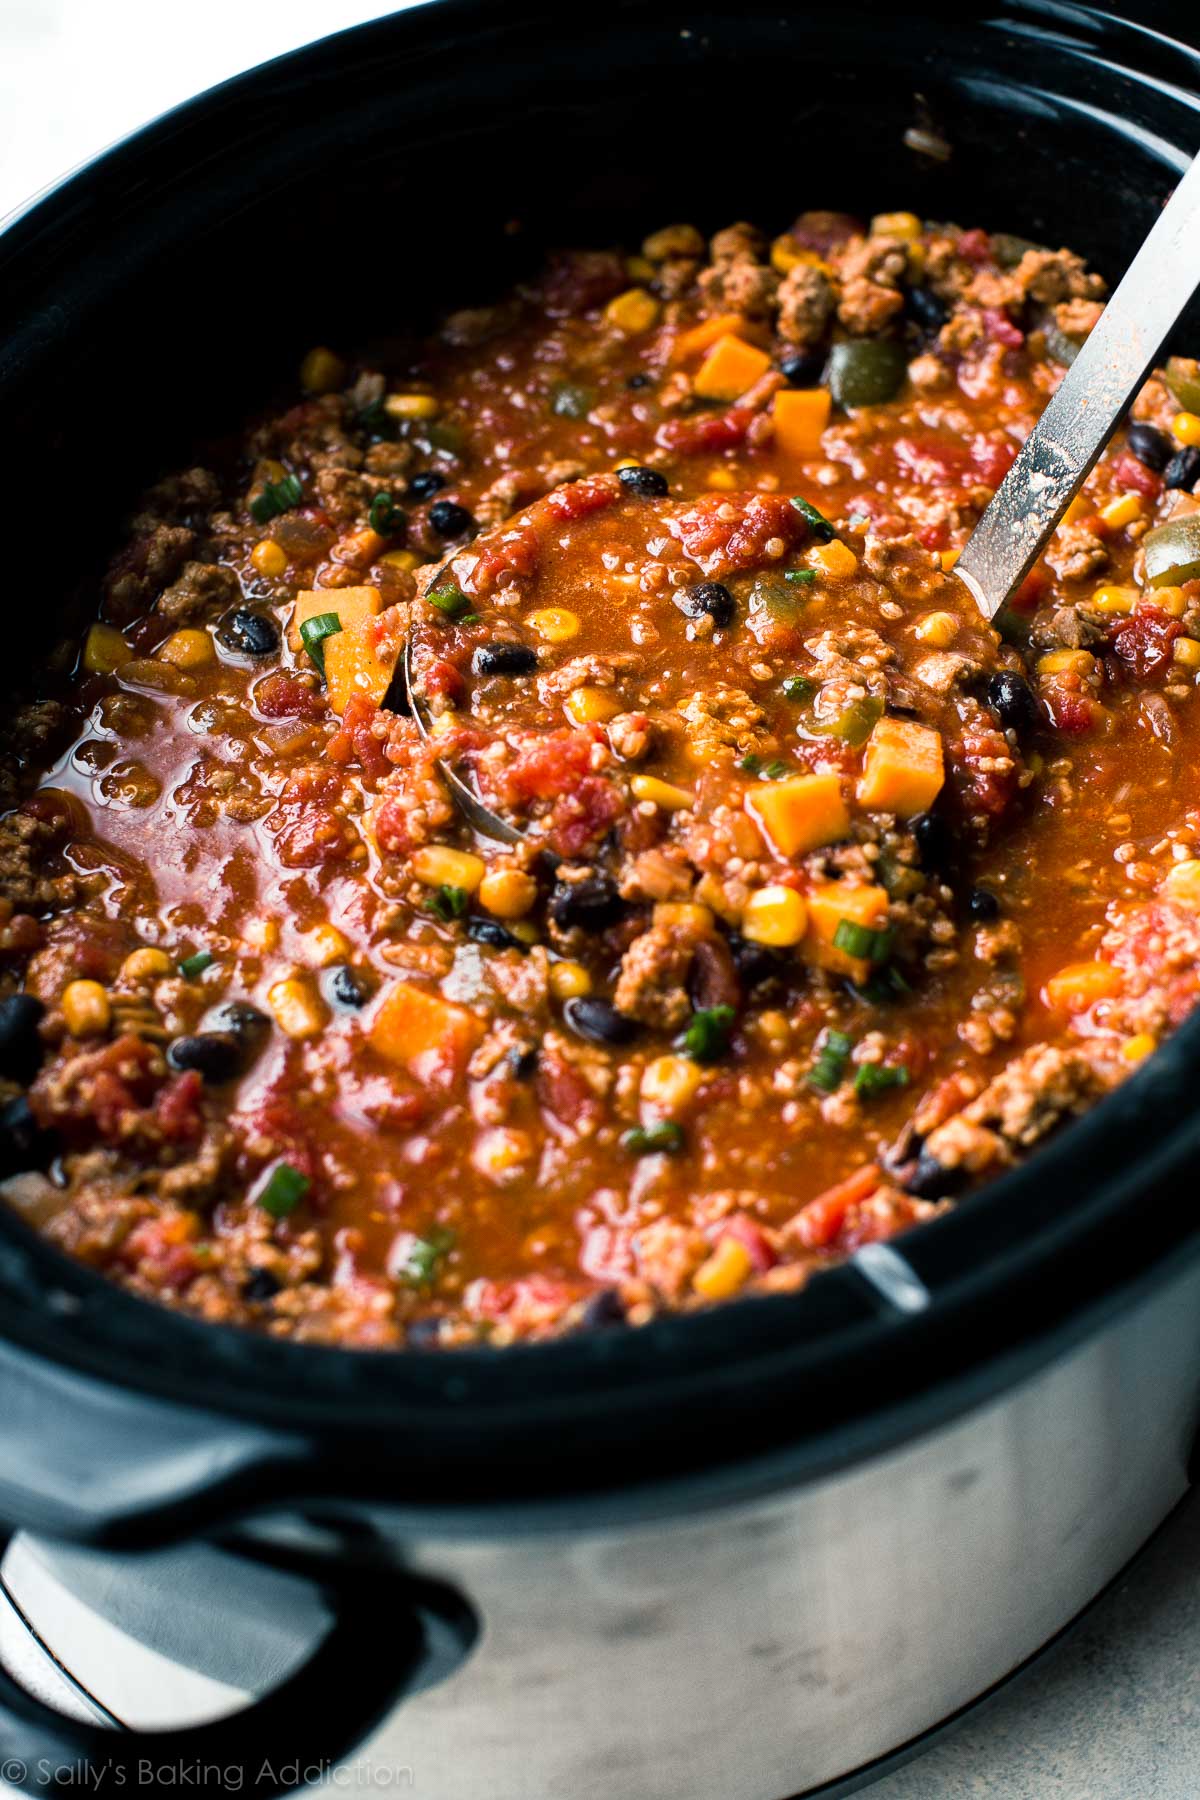 Slow Cooker Taco Spice Chili | Sally